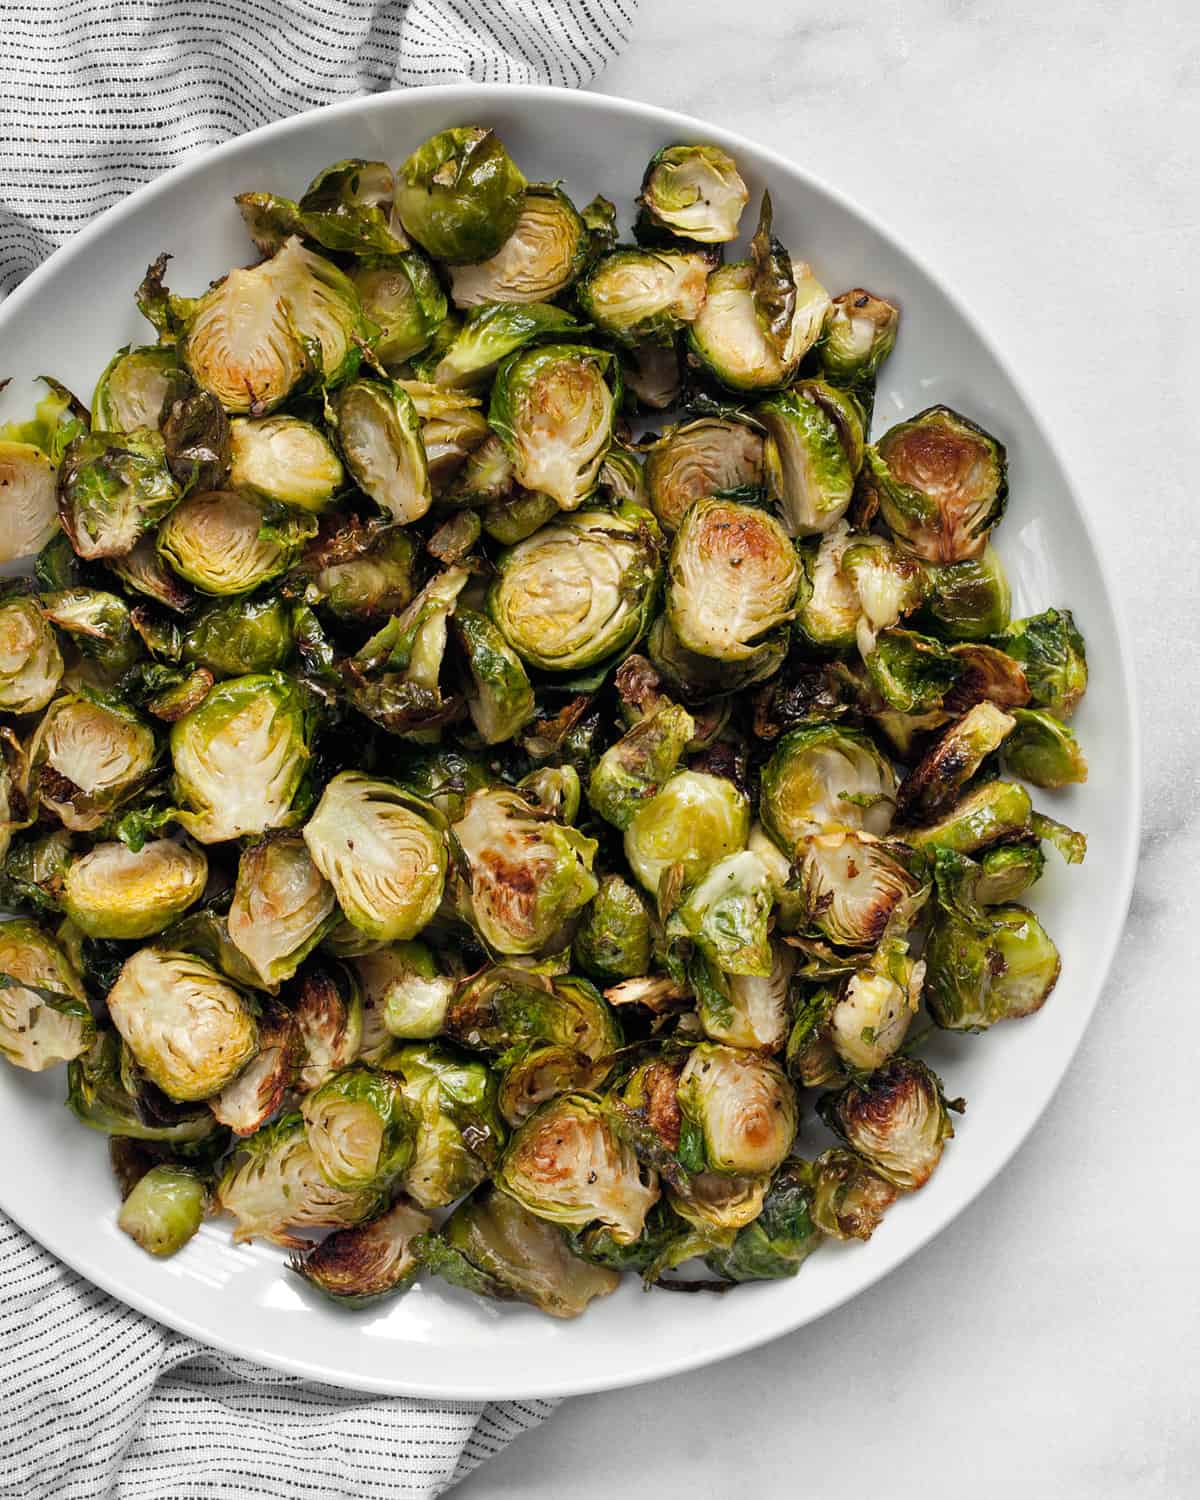 Roasted brussels sprouts on a plate.